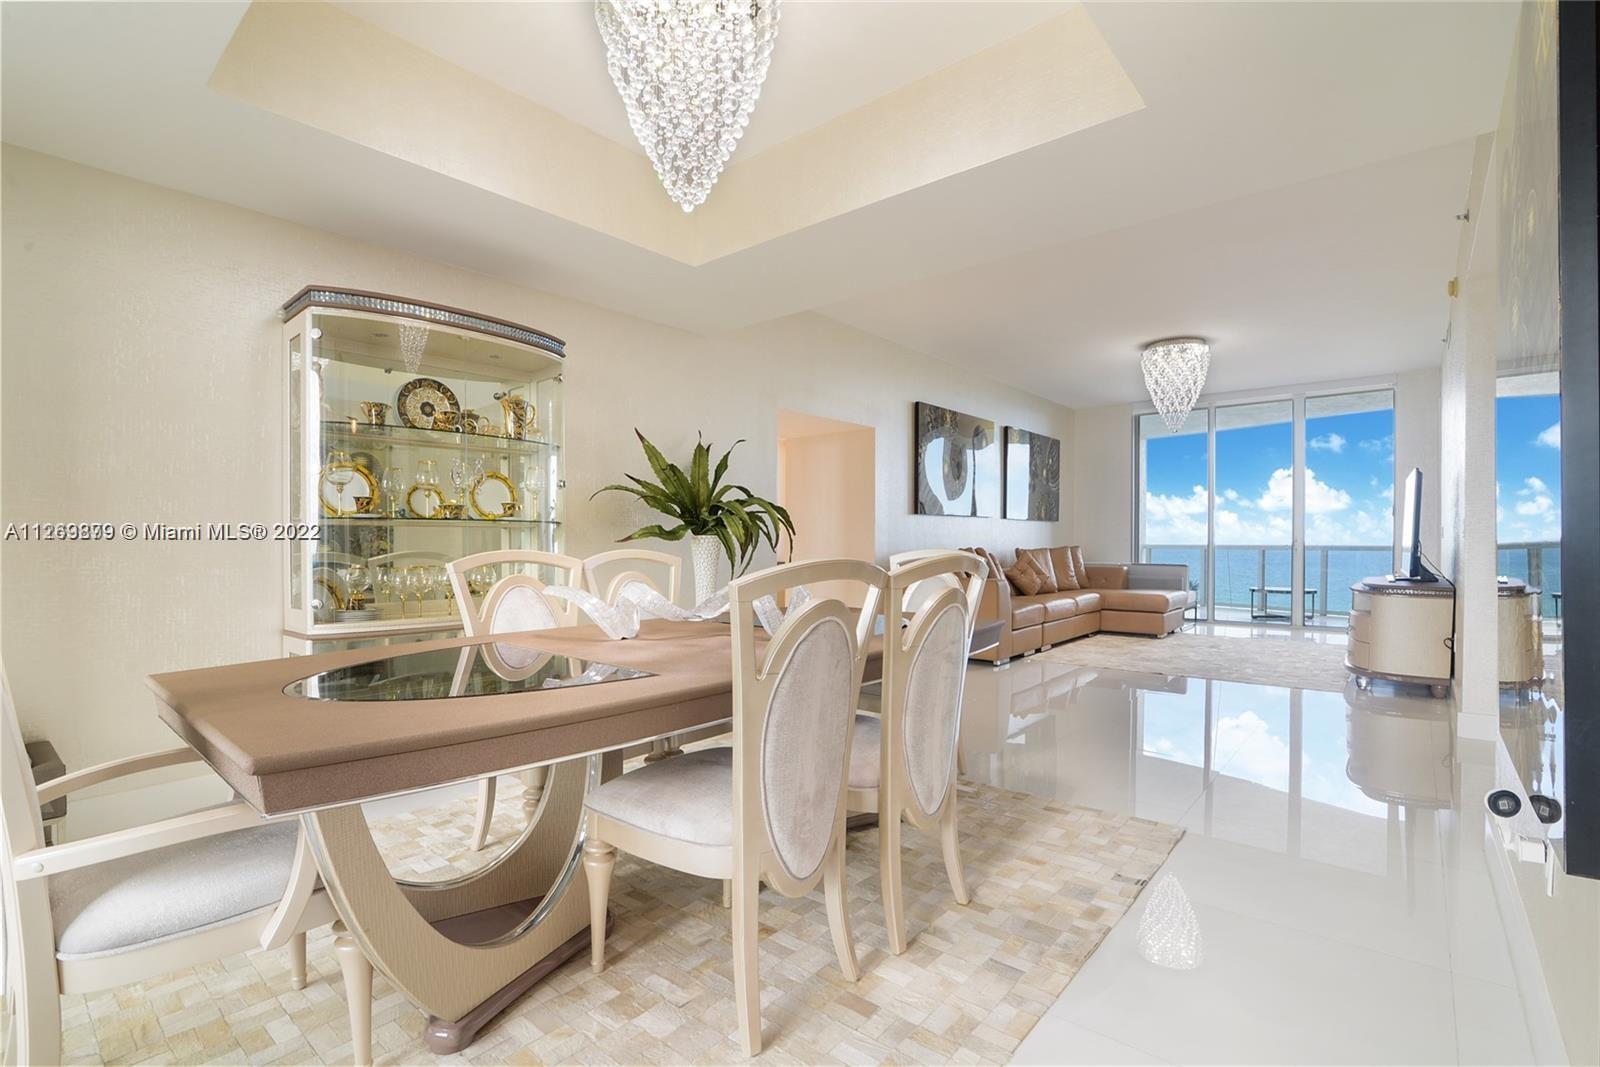 Stunning direct oceanfront residence in Trump Tower Three Sunny Isles Beach with multiple terraces a